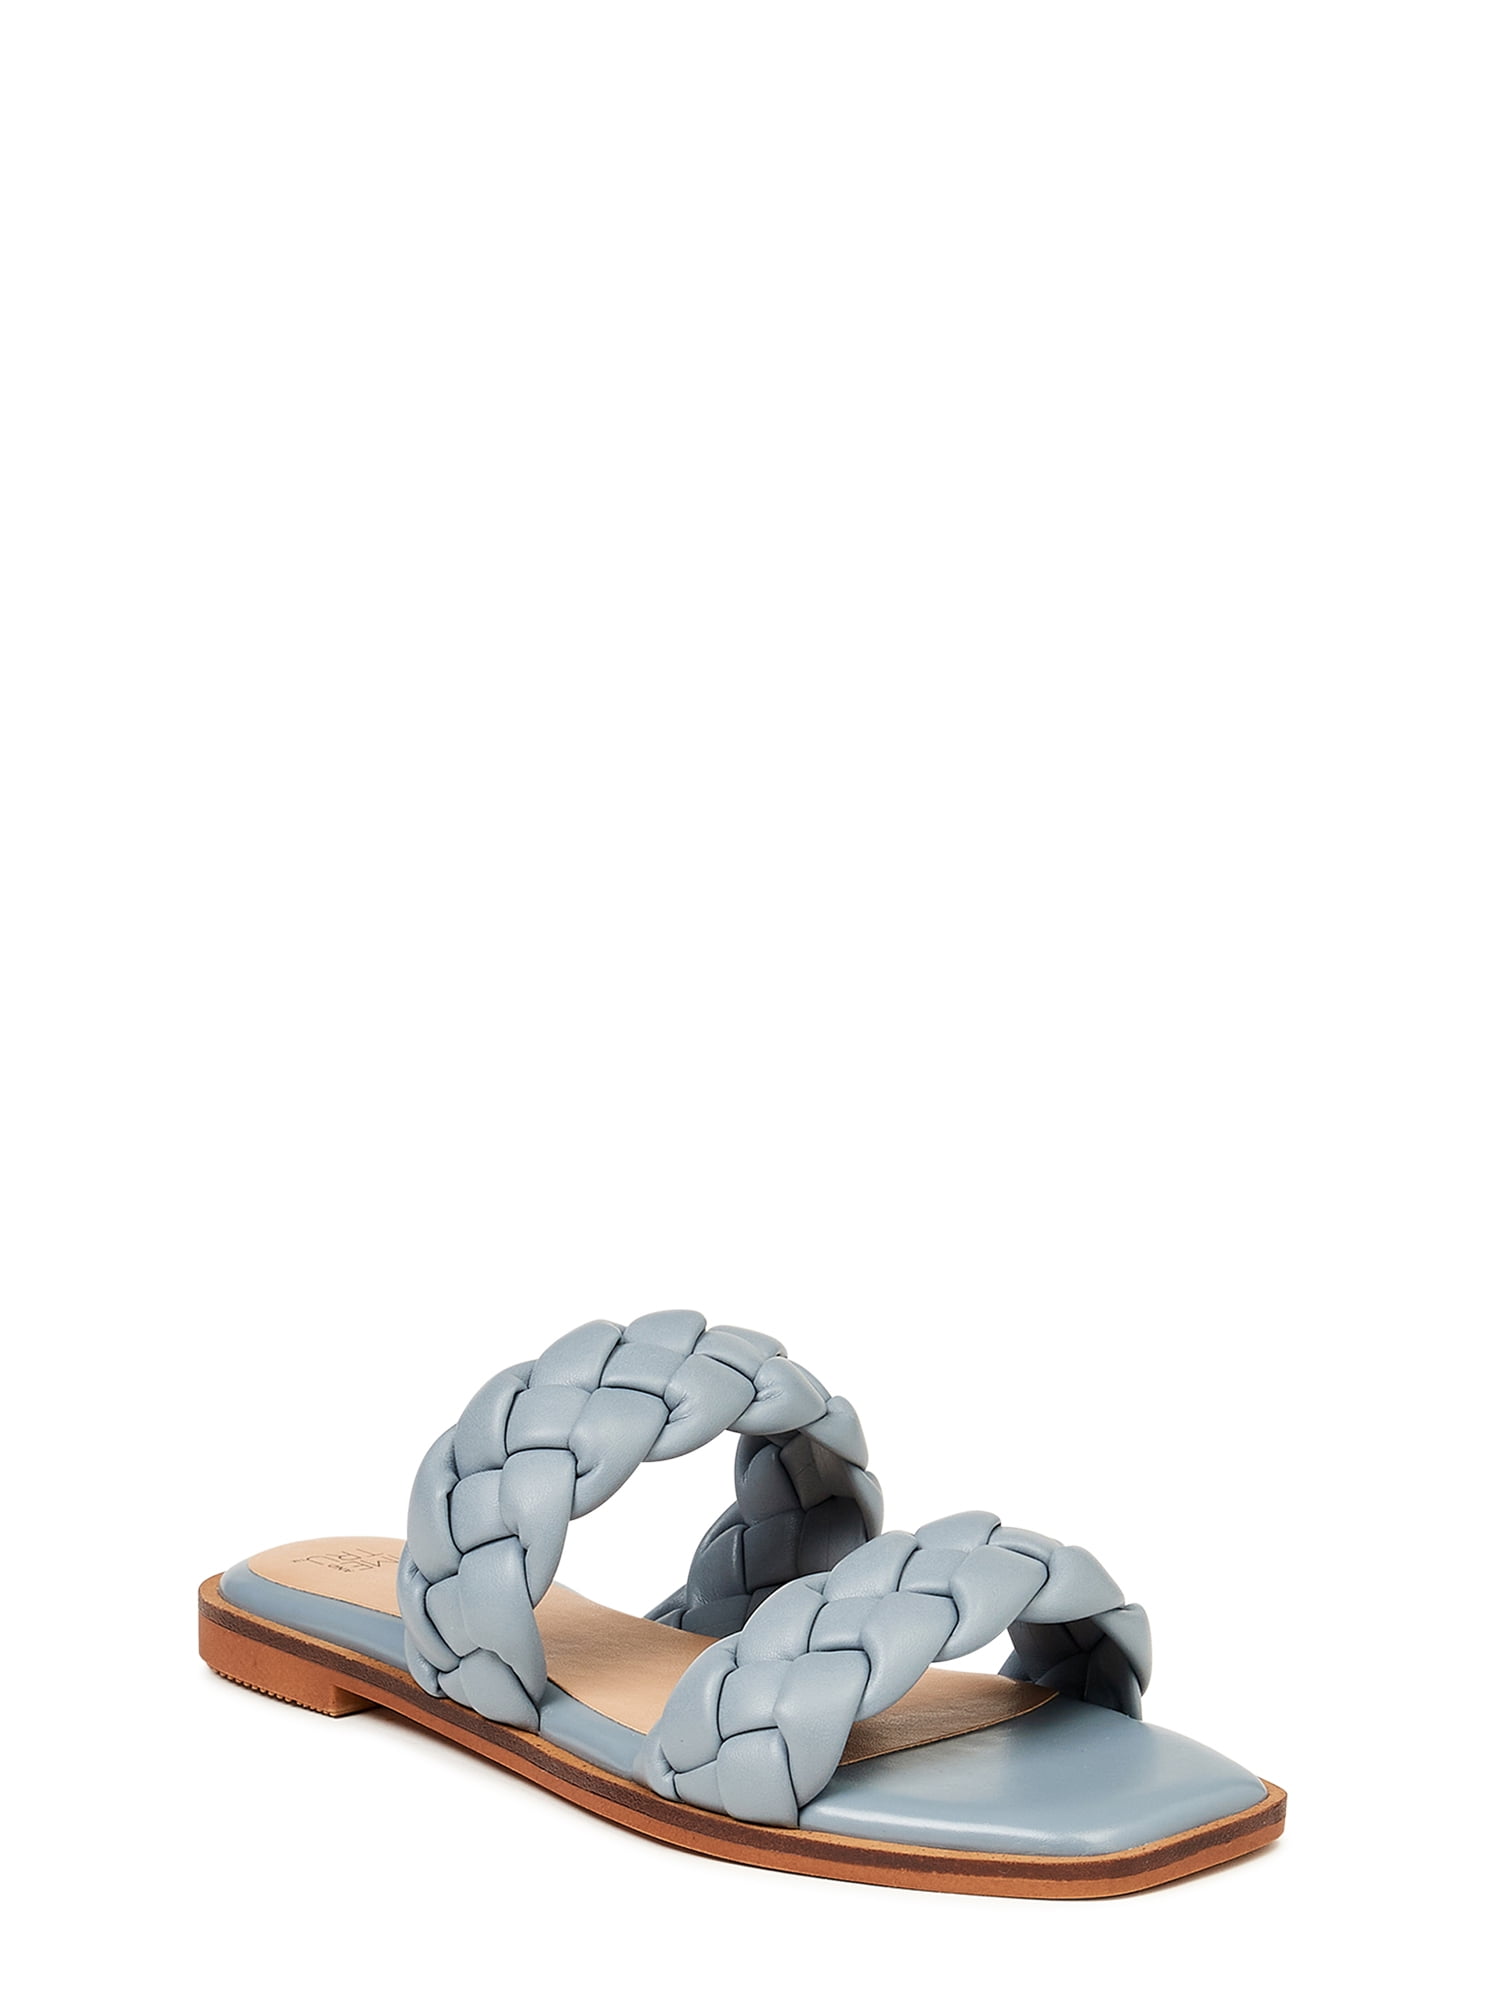 Time and Tru Women's Braided Two Band Sandals - Walmart.com